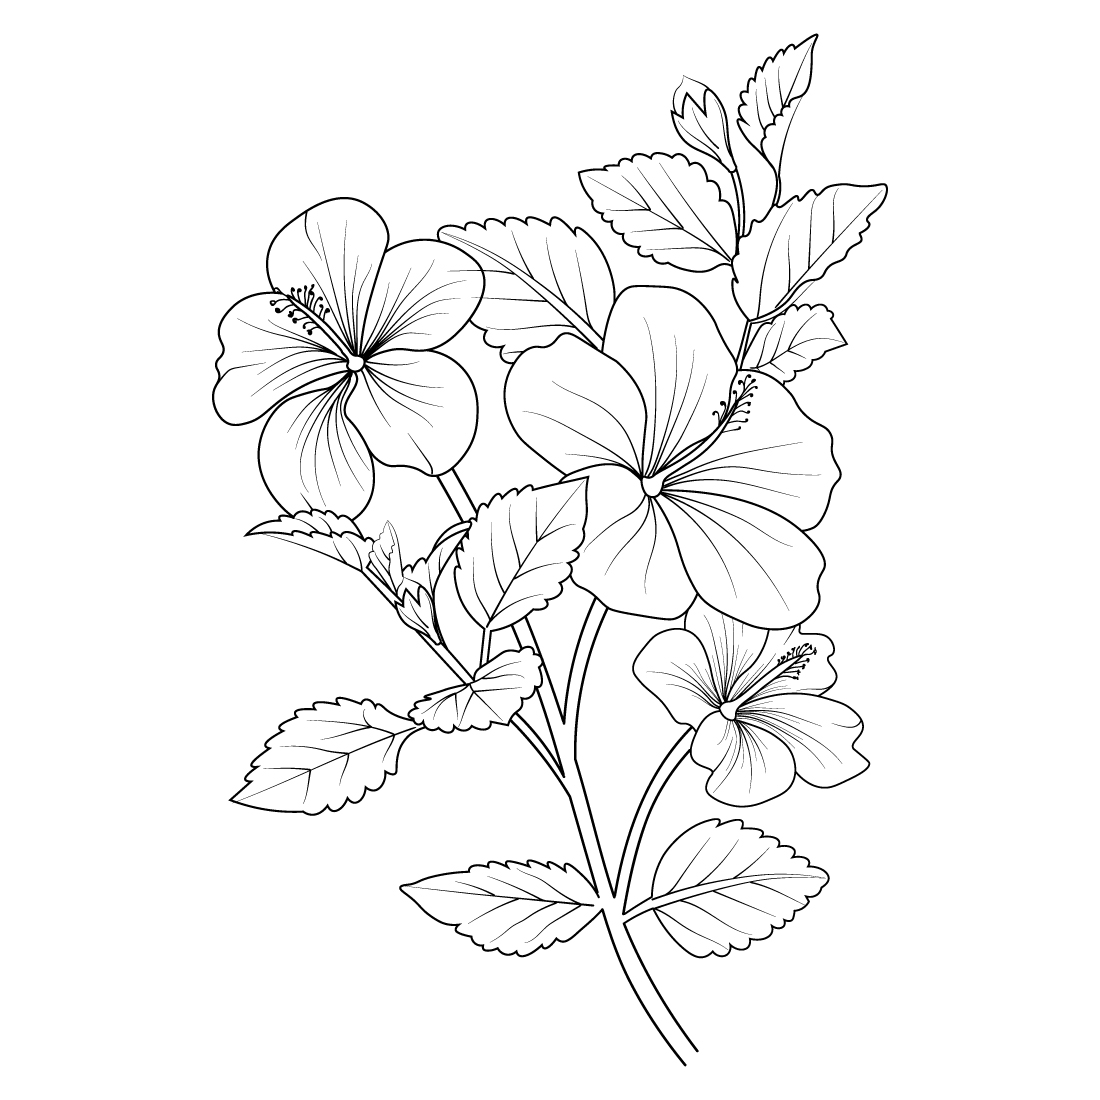 Isolated hibiscus hand-drawn vector sketch illustration, botanic collection branch of leaf buds natural collection coloring page cover image.